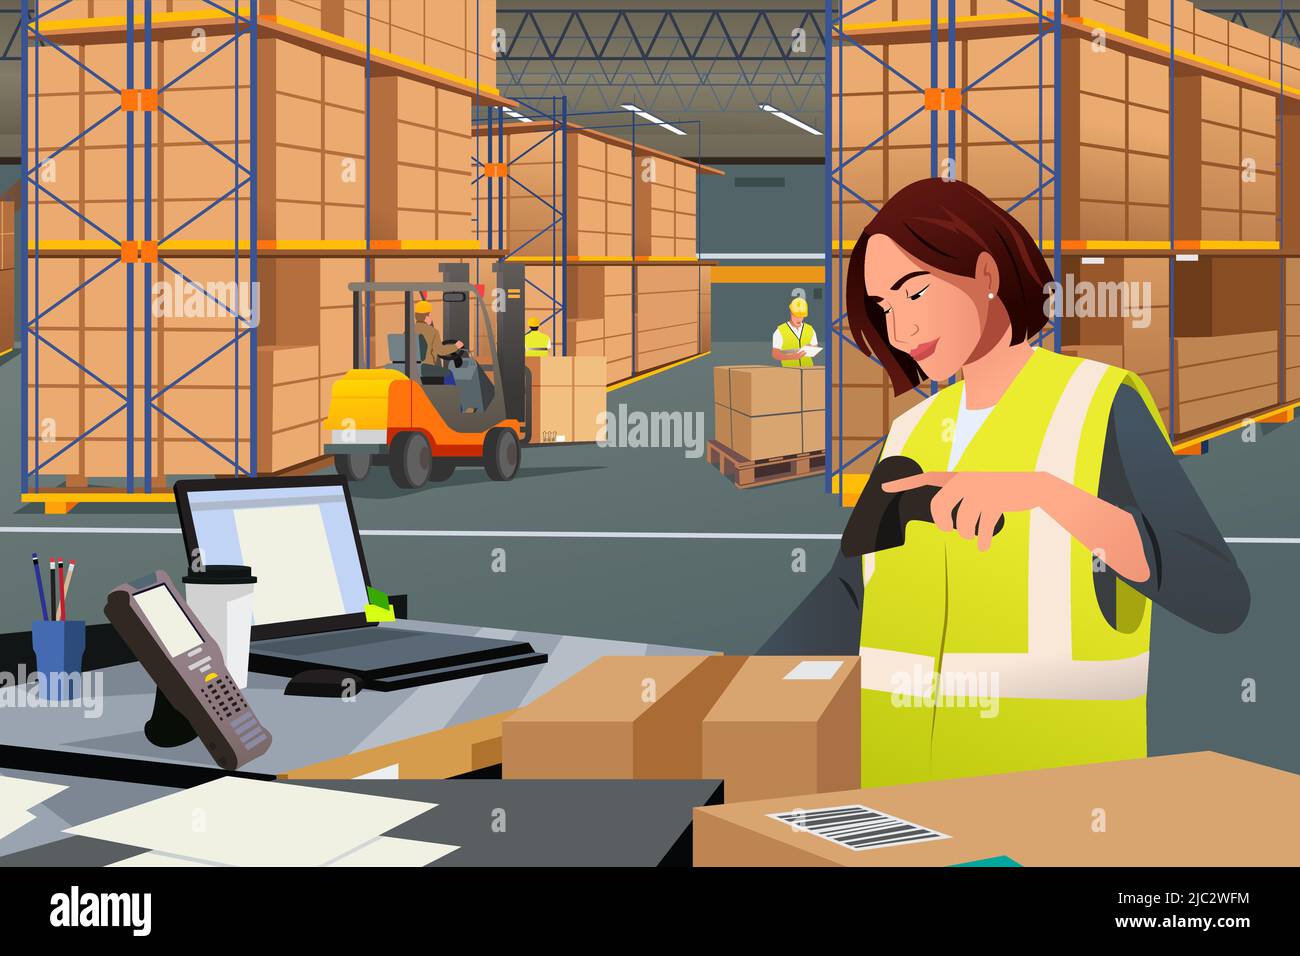 A vector illustration of Warehouse Worker Scanning a Box Stock Vector